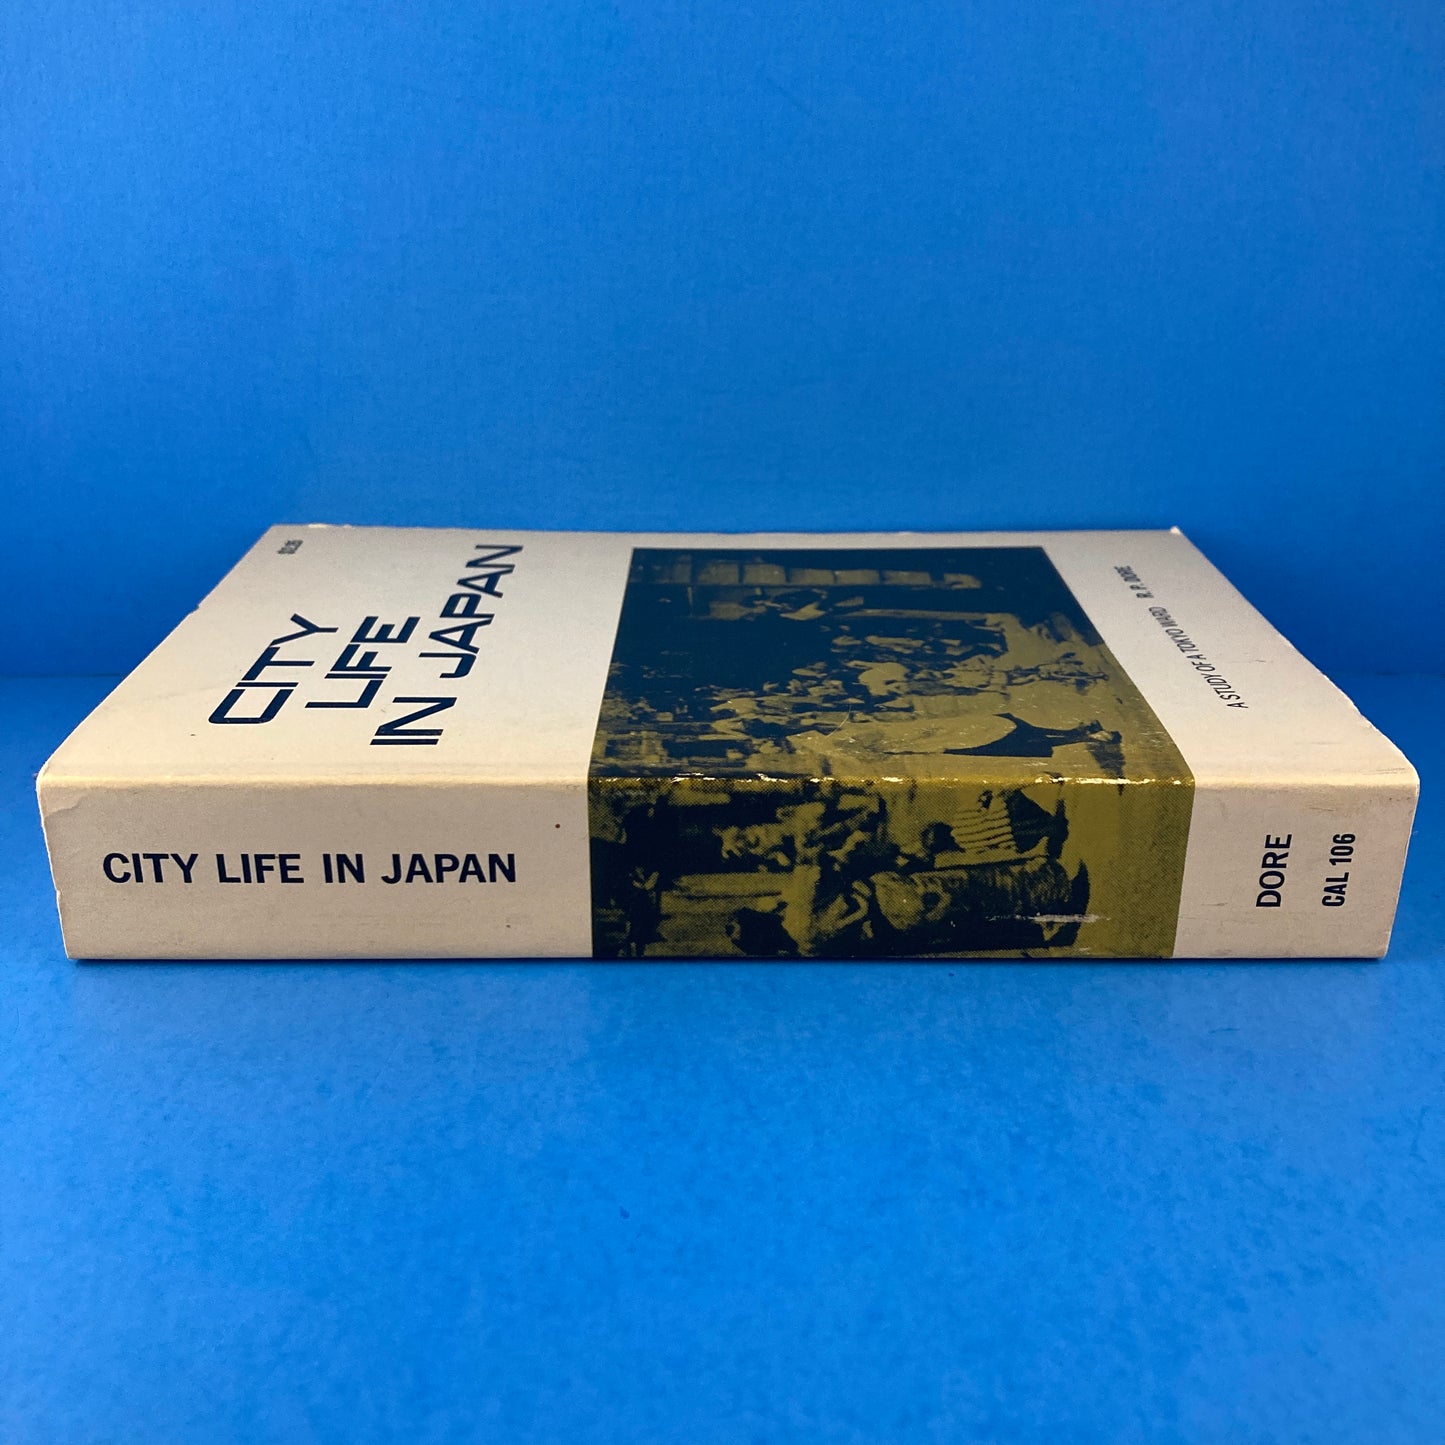 City Life in Japan